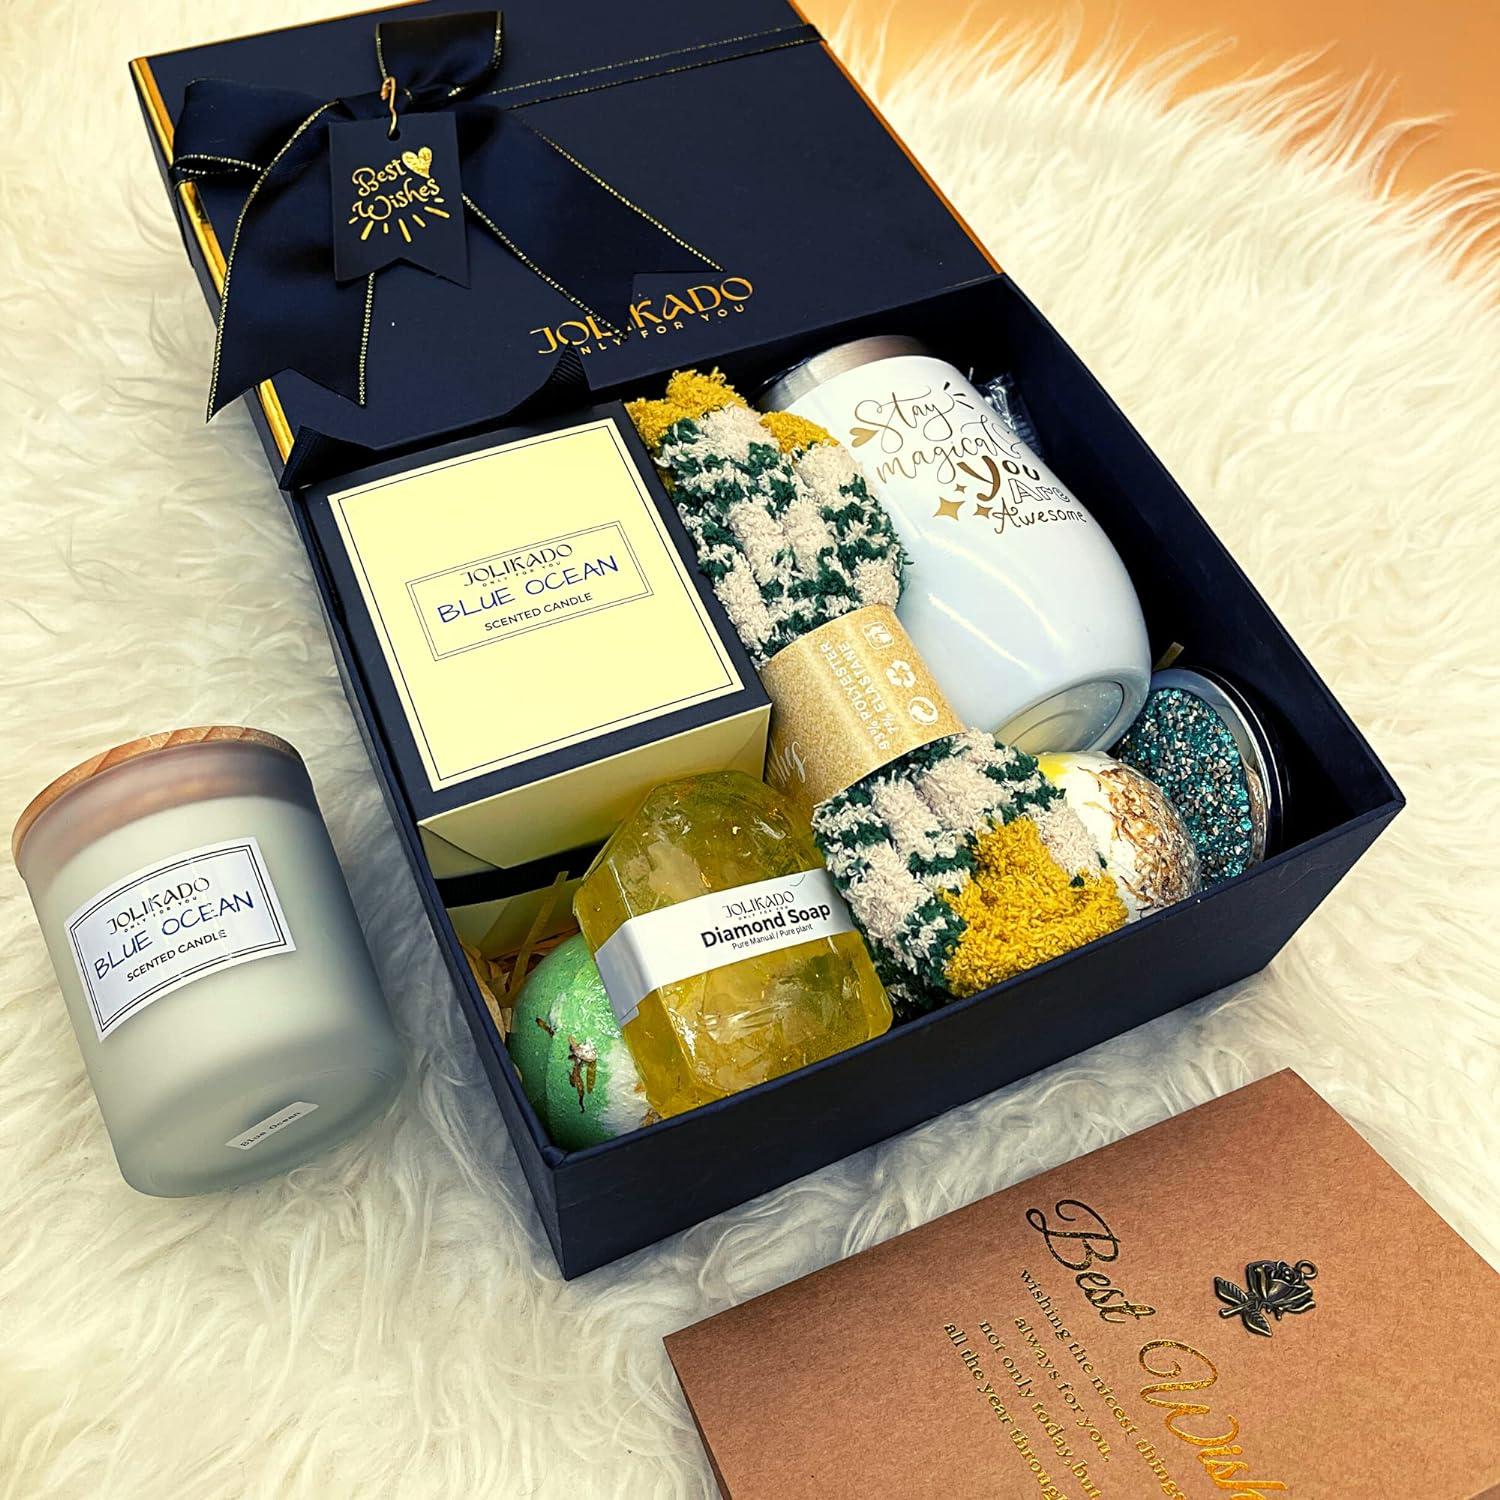 Birthday Gifts Set for Women Wife Mom Sister Daughter Best Friend by  JoliKado Scented Candle Tumbler Bath Bombs Socks Relaxing Spa Box Gift Get  Well Soon Gift Care Package